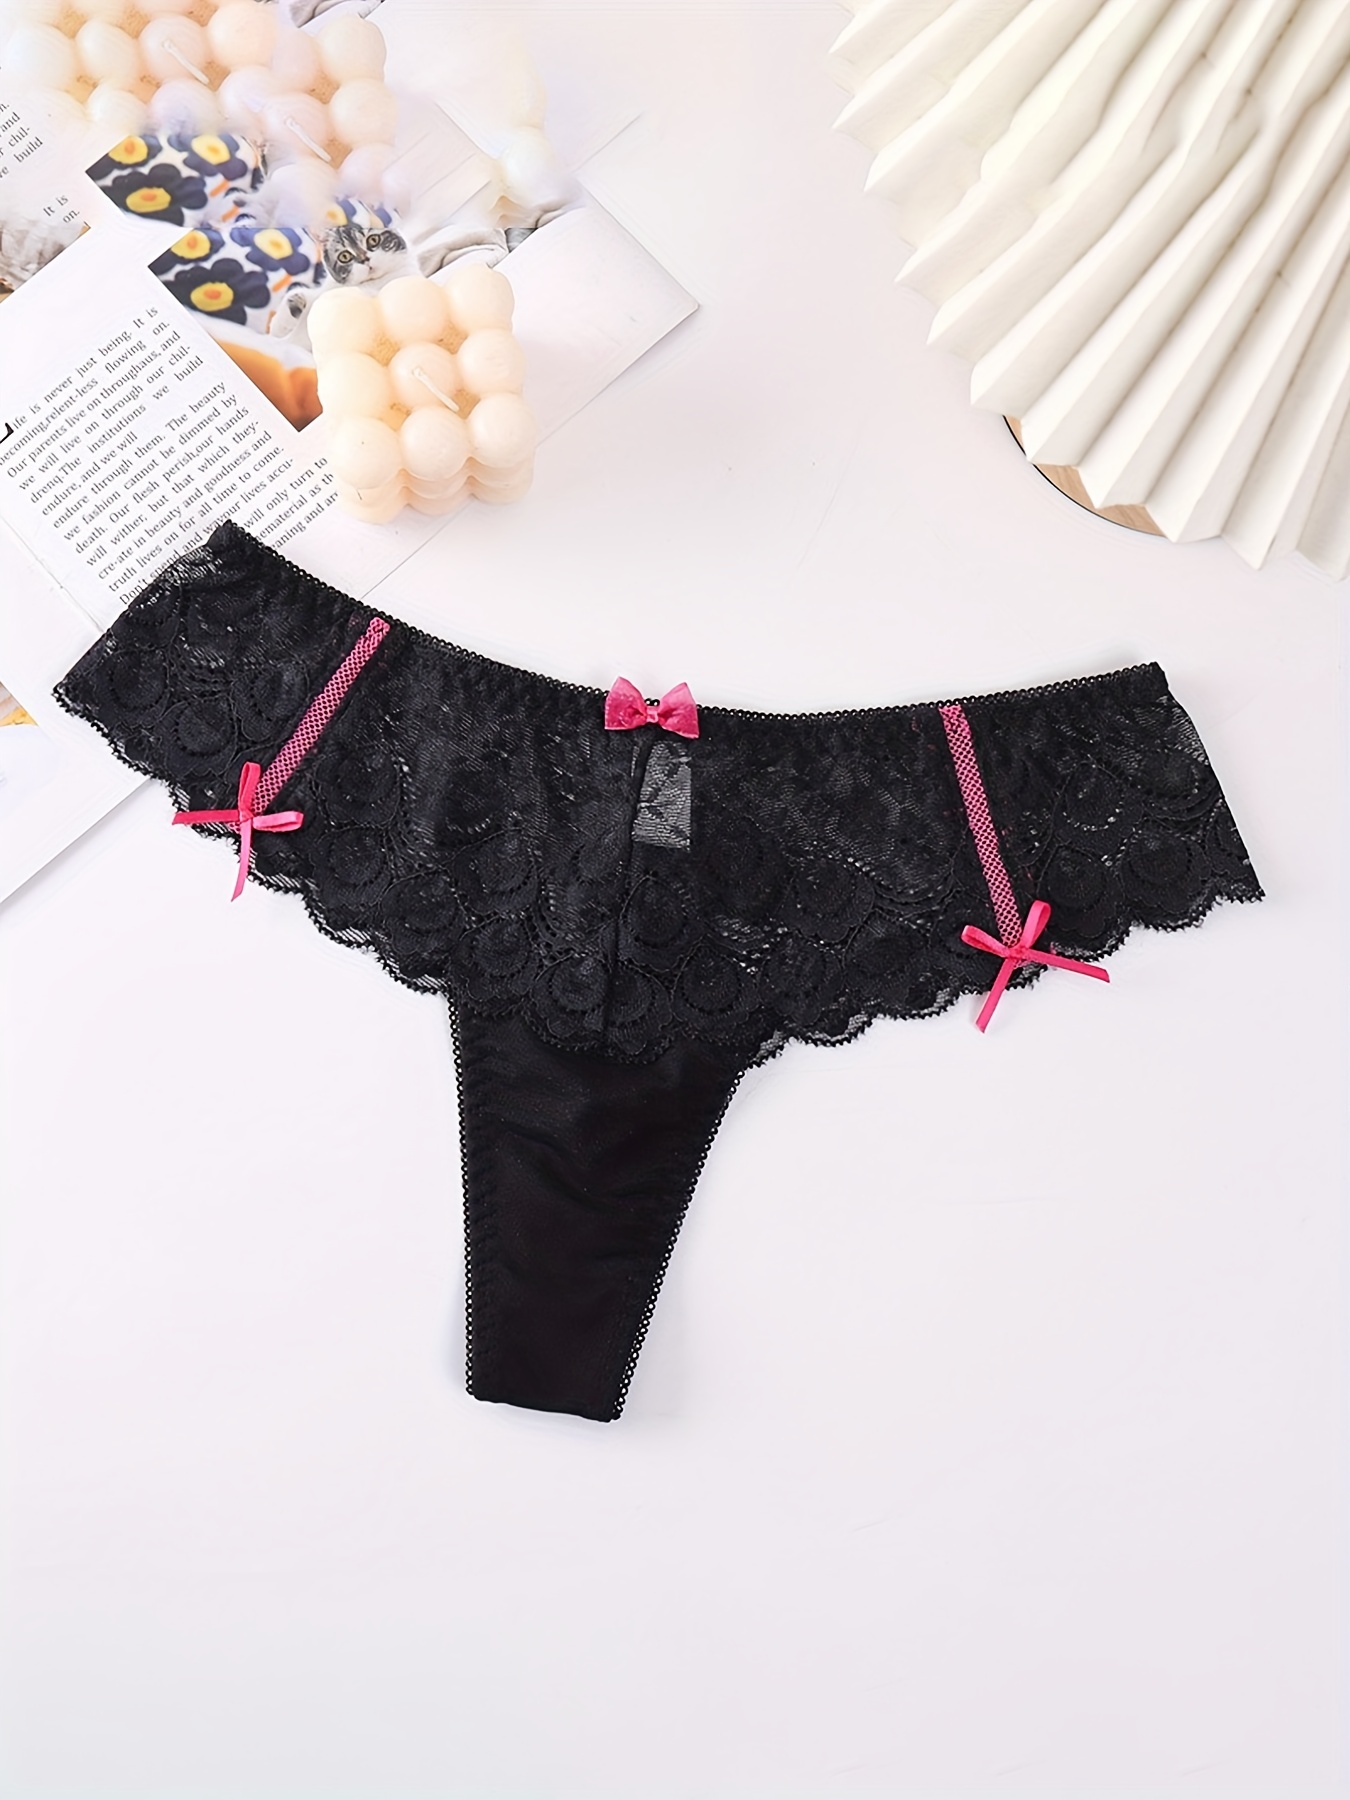 Buy Shyle Pink Black Lace Thong for Women 